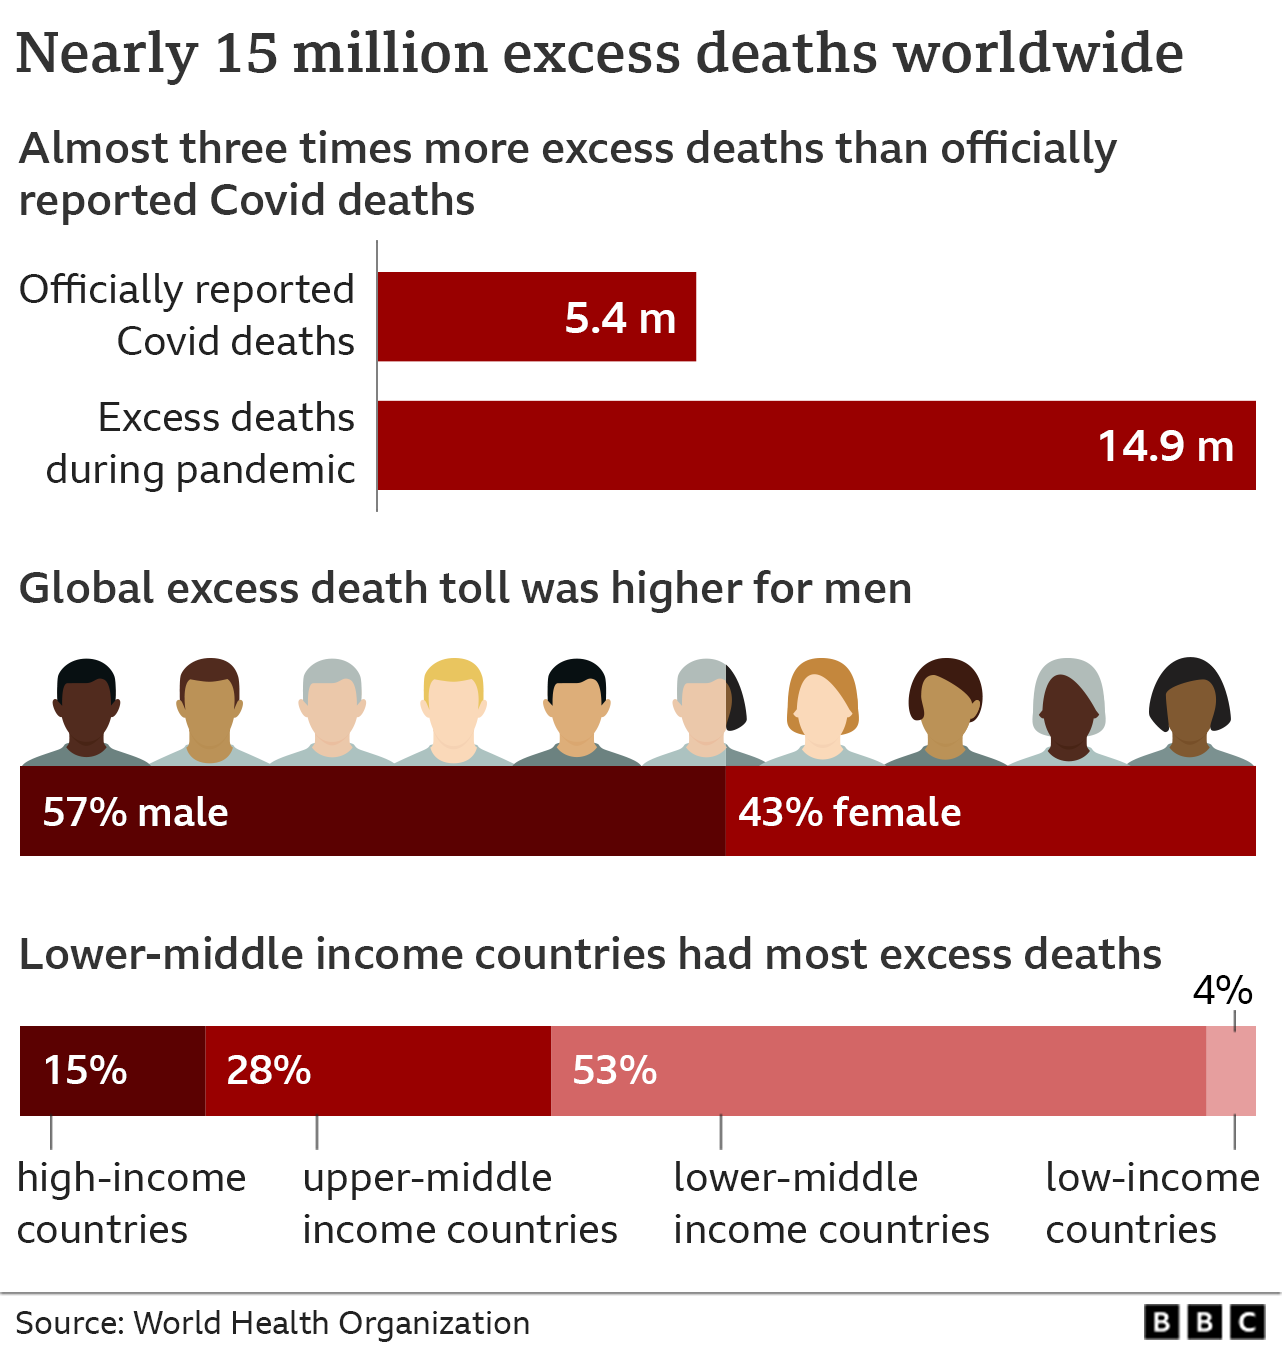 Graphic showing the breakdown of global excess deaths, with 57% male and 43% female as well as showing middle income countries having the highest proportion of excess deaths at 81%